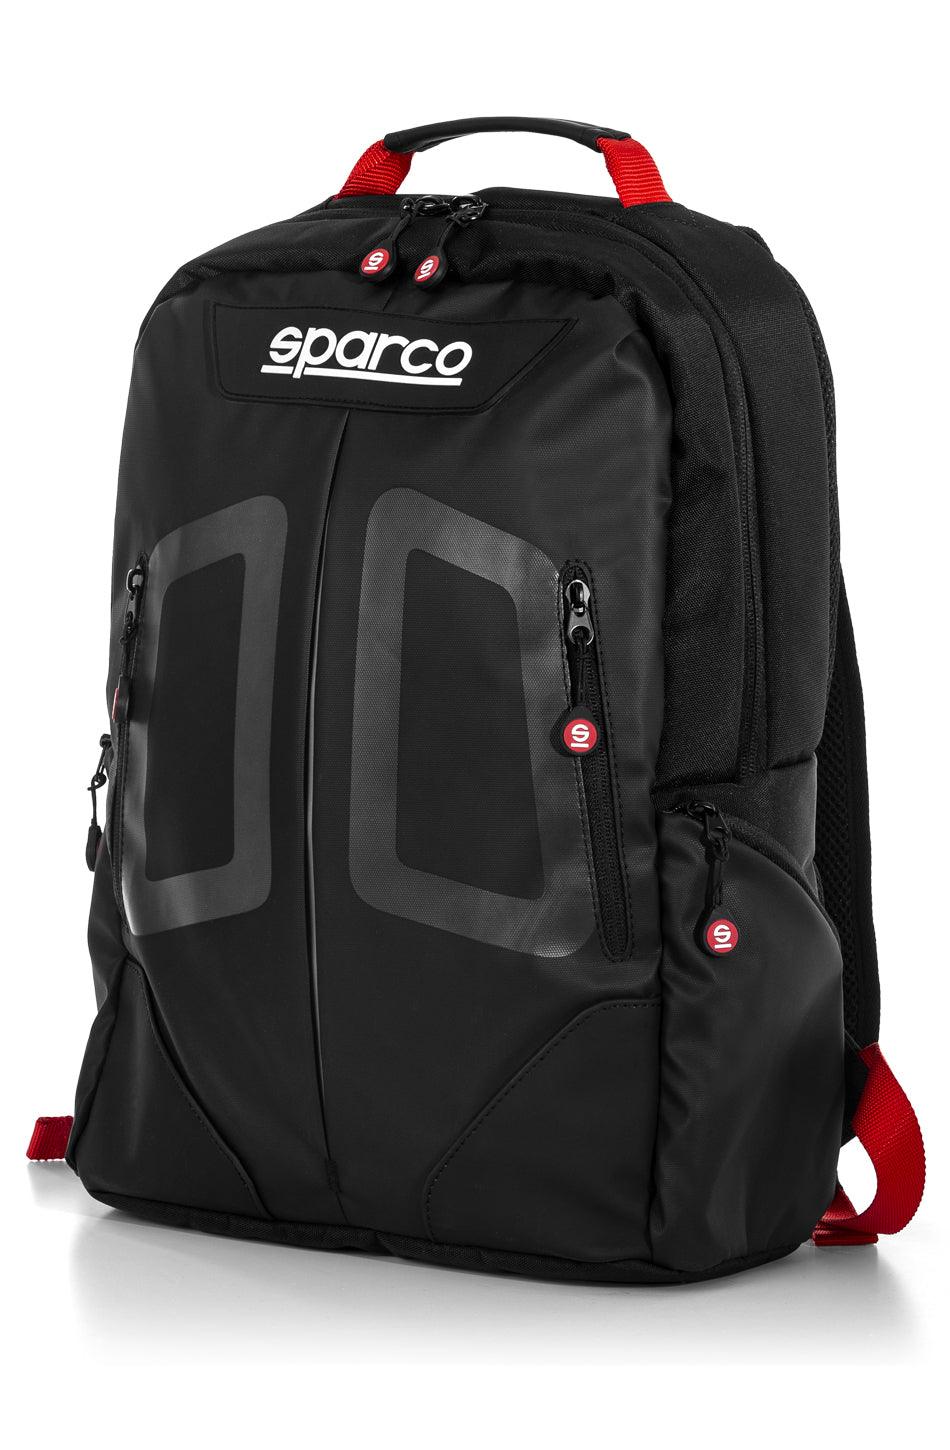 Backpack Stage Black / Red - Burlile Performance Products